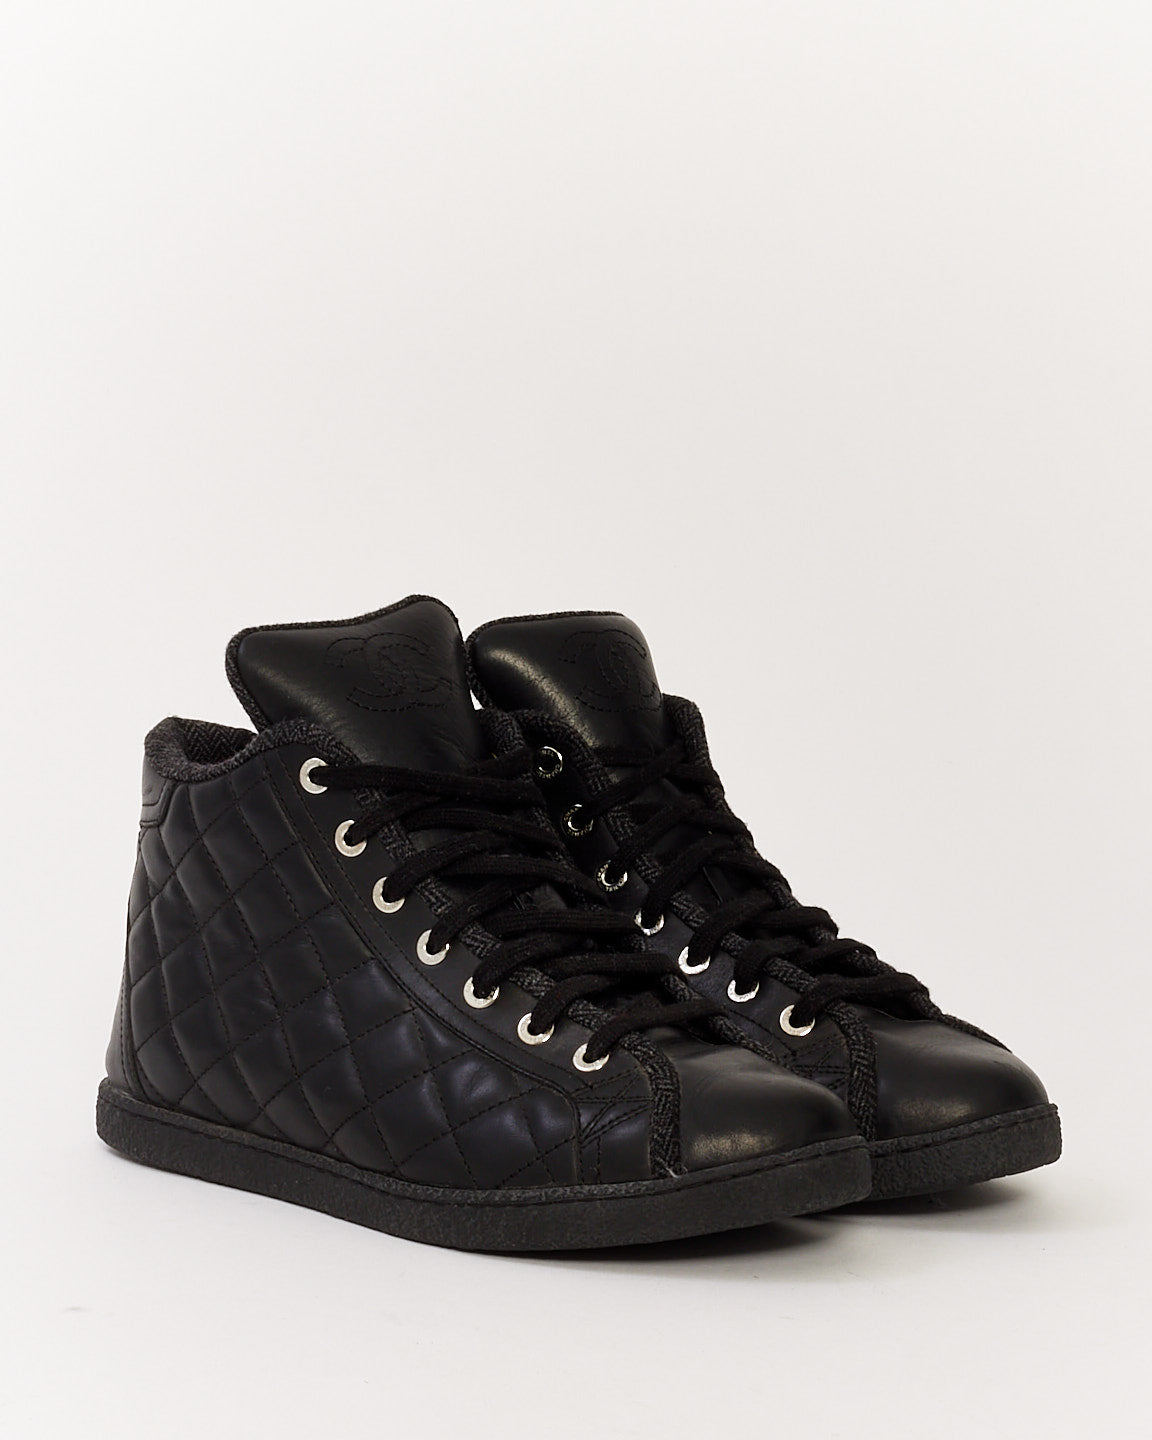 Chanel Black Quilted Lambskin Leather High Top Sneakers - 37.5